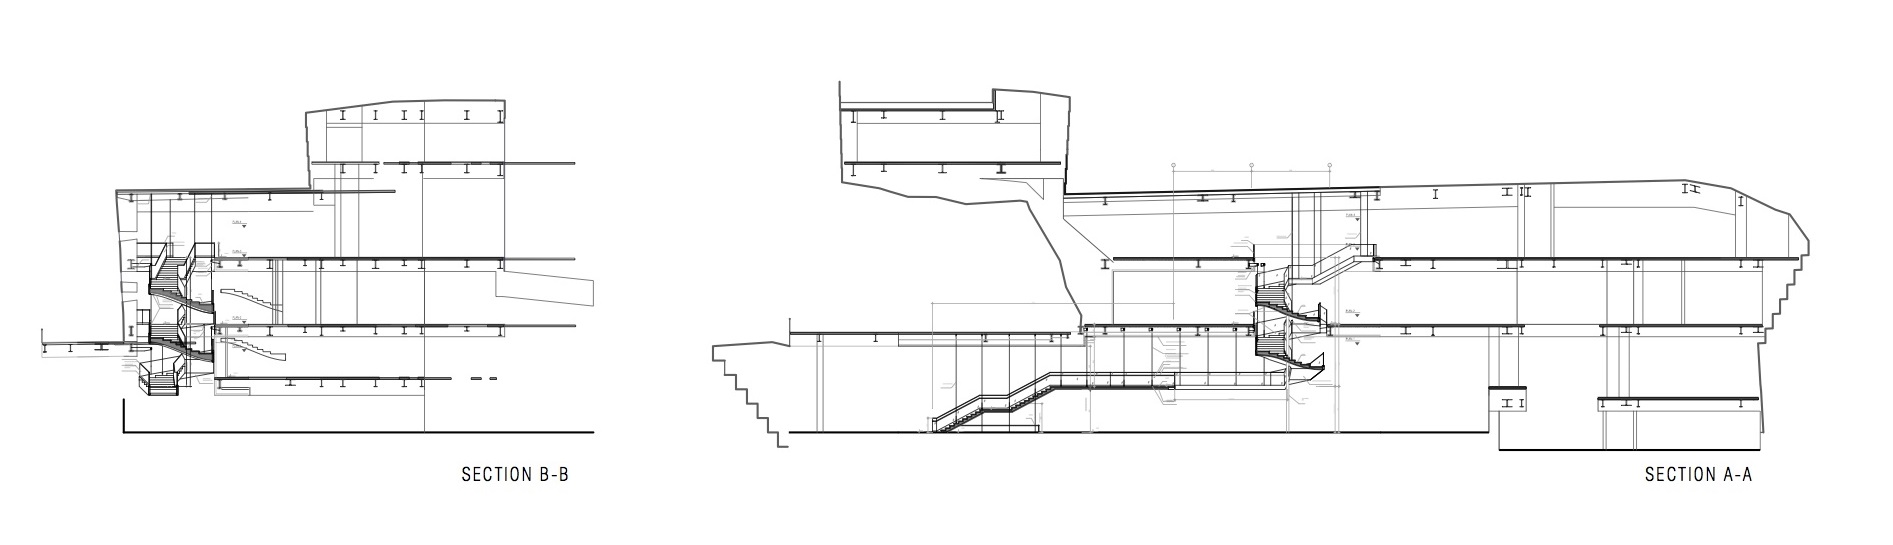 section drawing